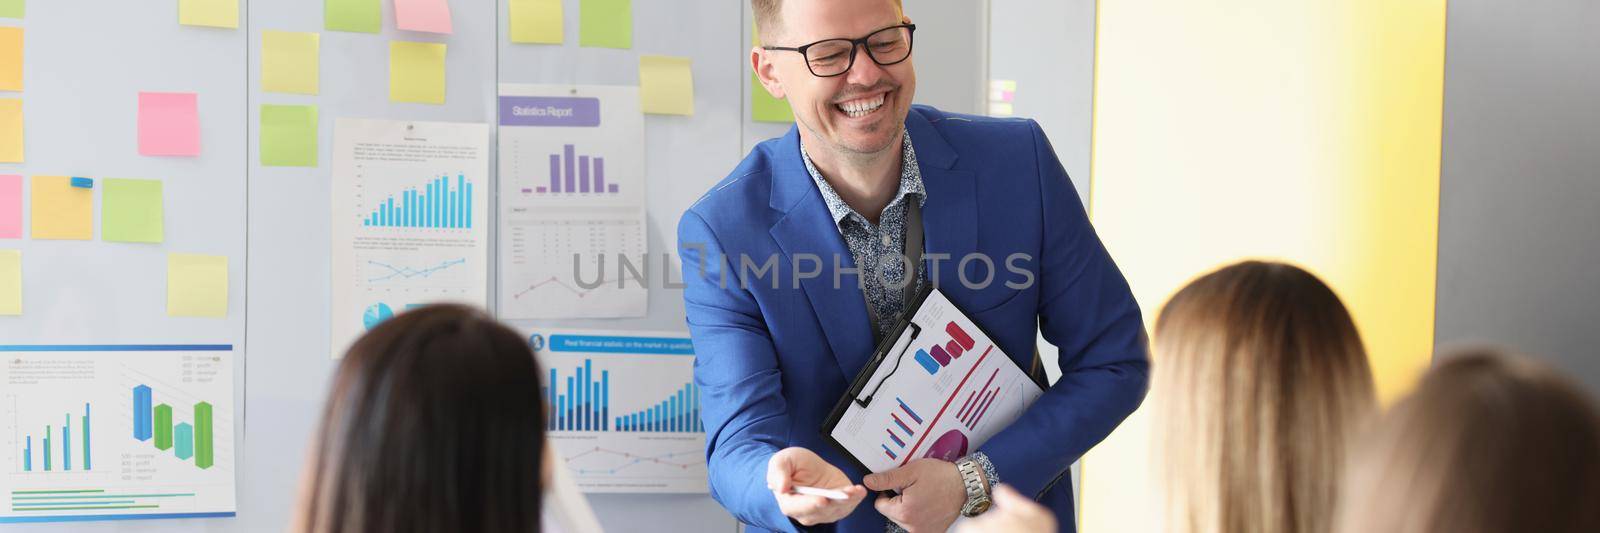 Portrait of laughing man speech giver stand in from of colleagues and explain something. Training for company workers, skills development. Business concept